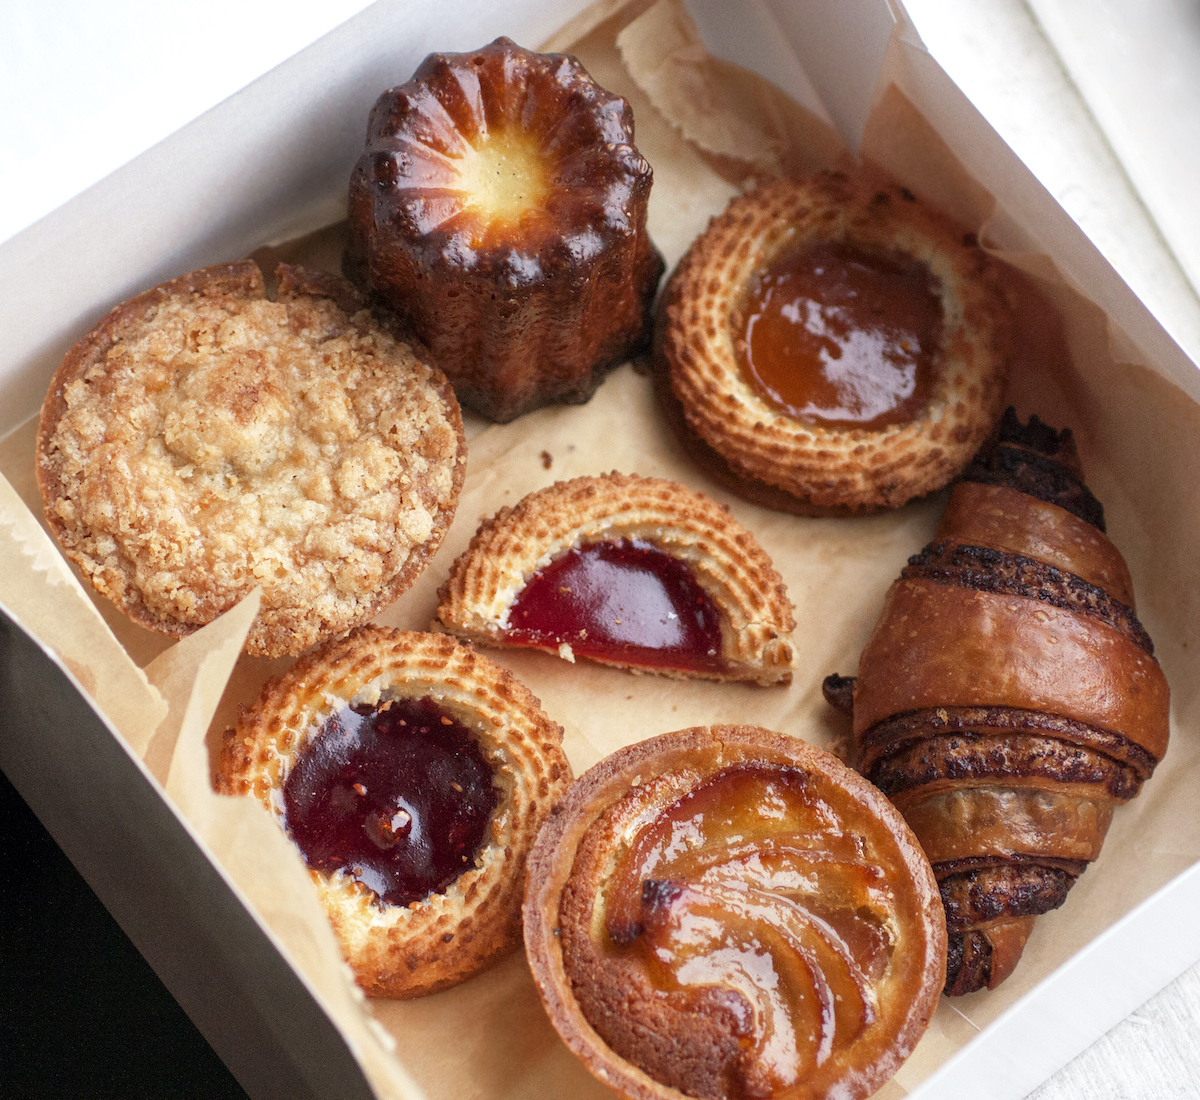 Selection of pastries in a white box